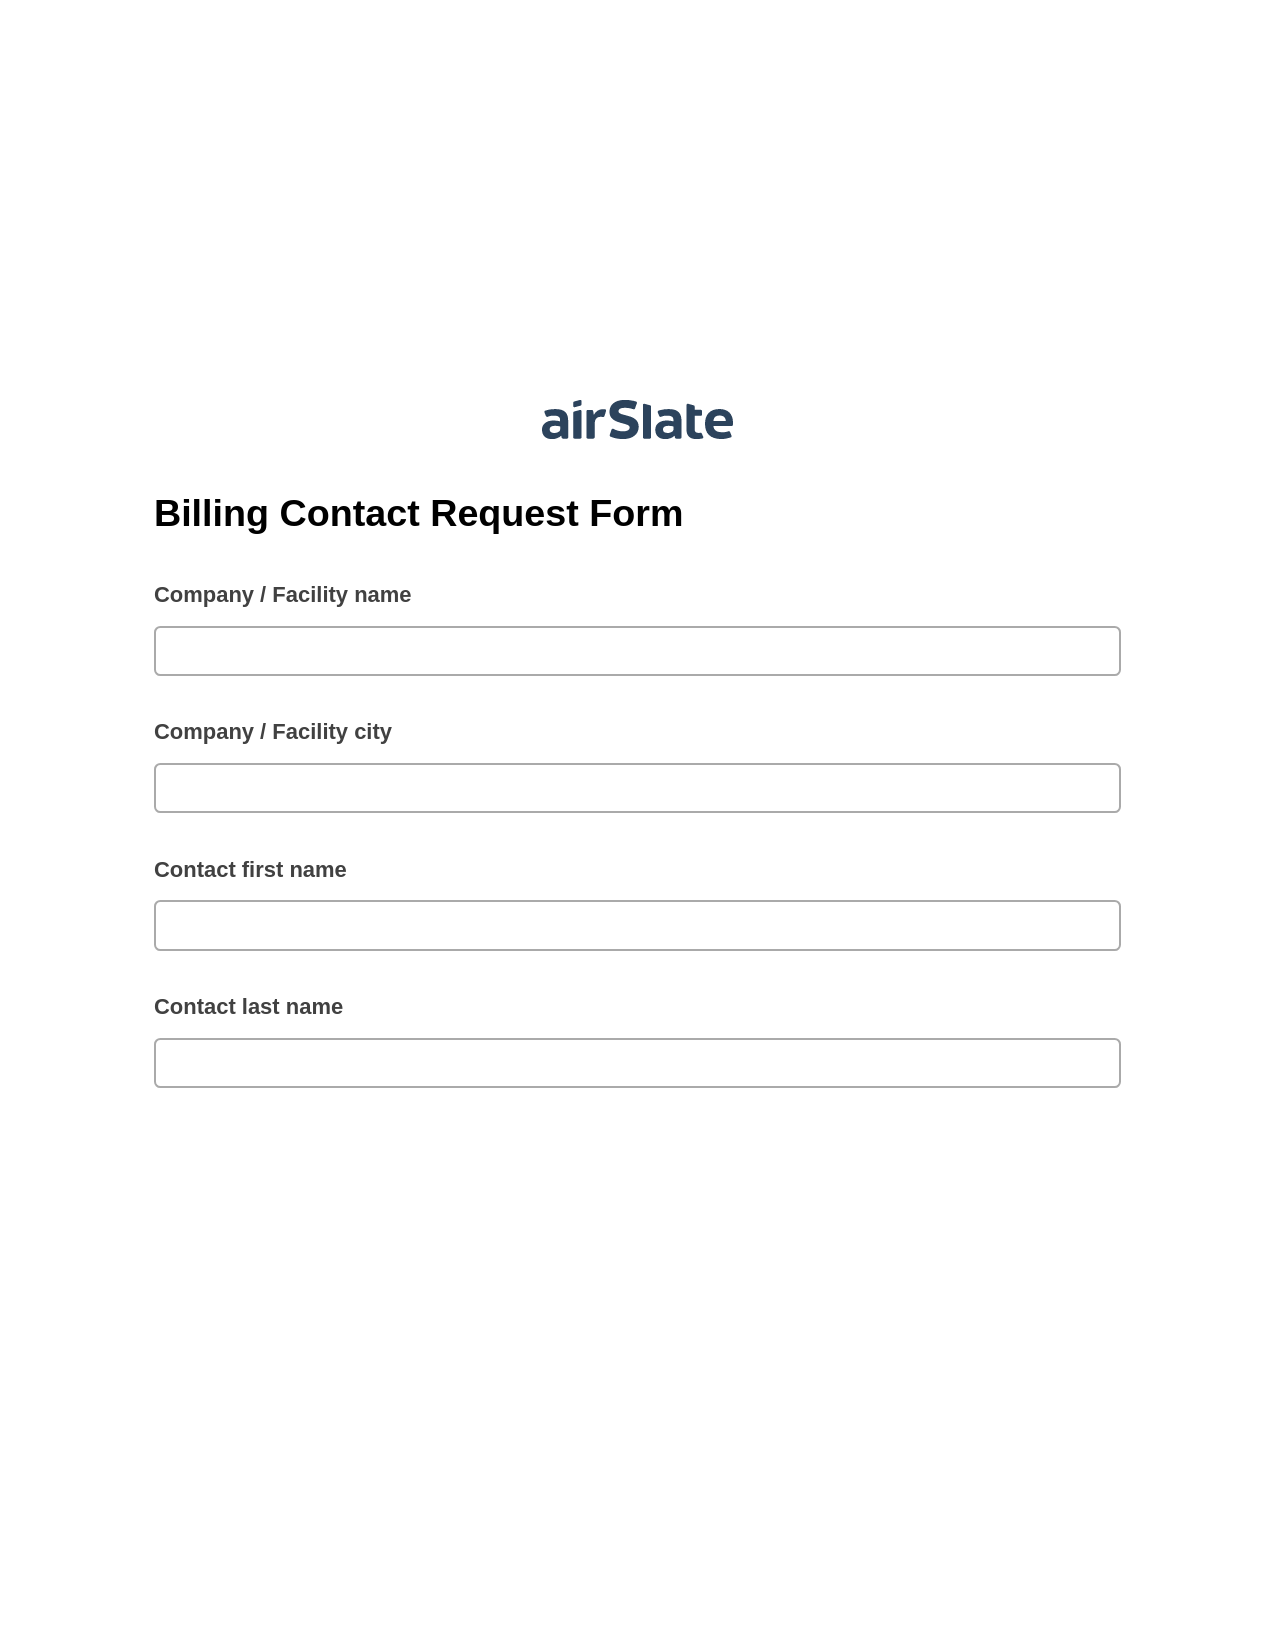 Multirole Billing Contact Request Form Pre-fill Dropdowns from MySQL Bot, Hide Signatures Bot, Archive to SharePoint Folder Bot